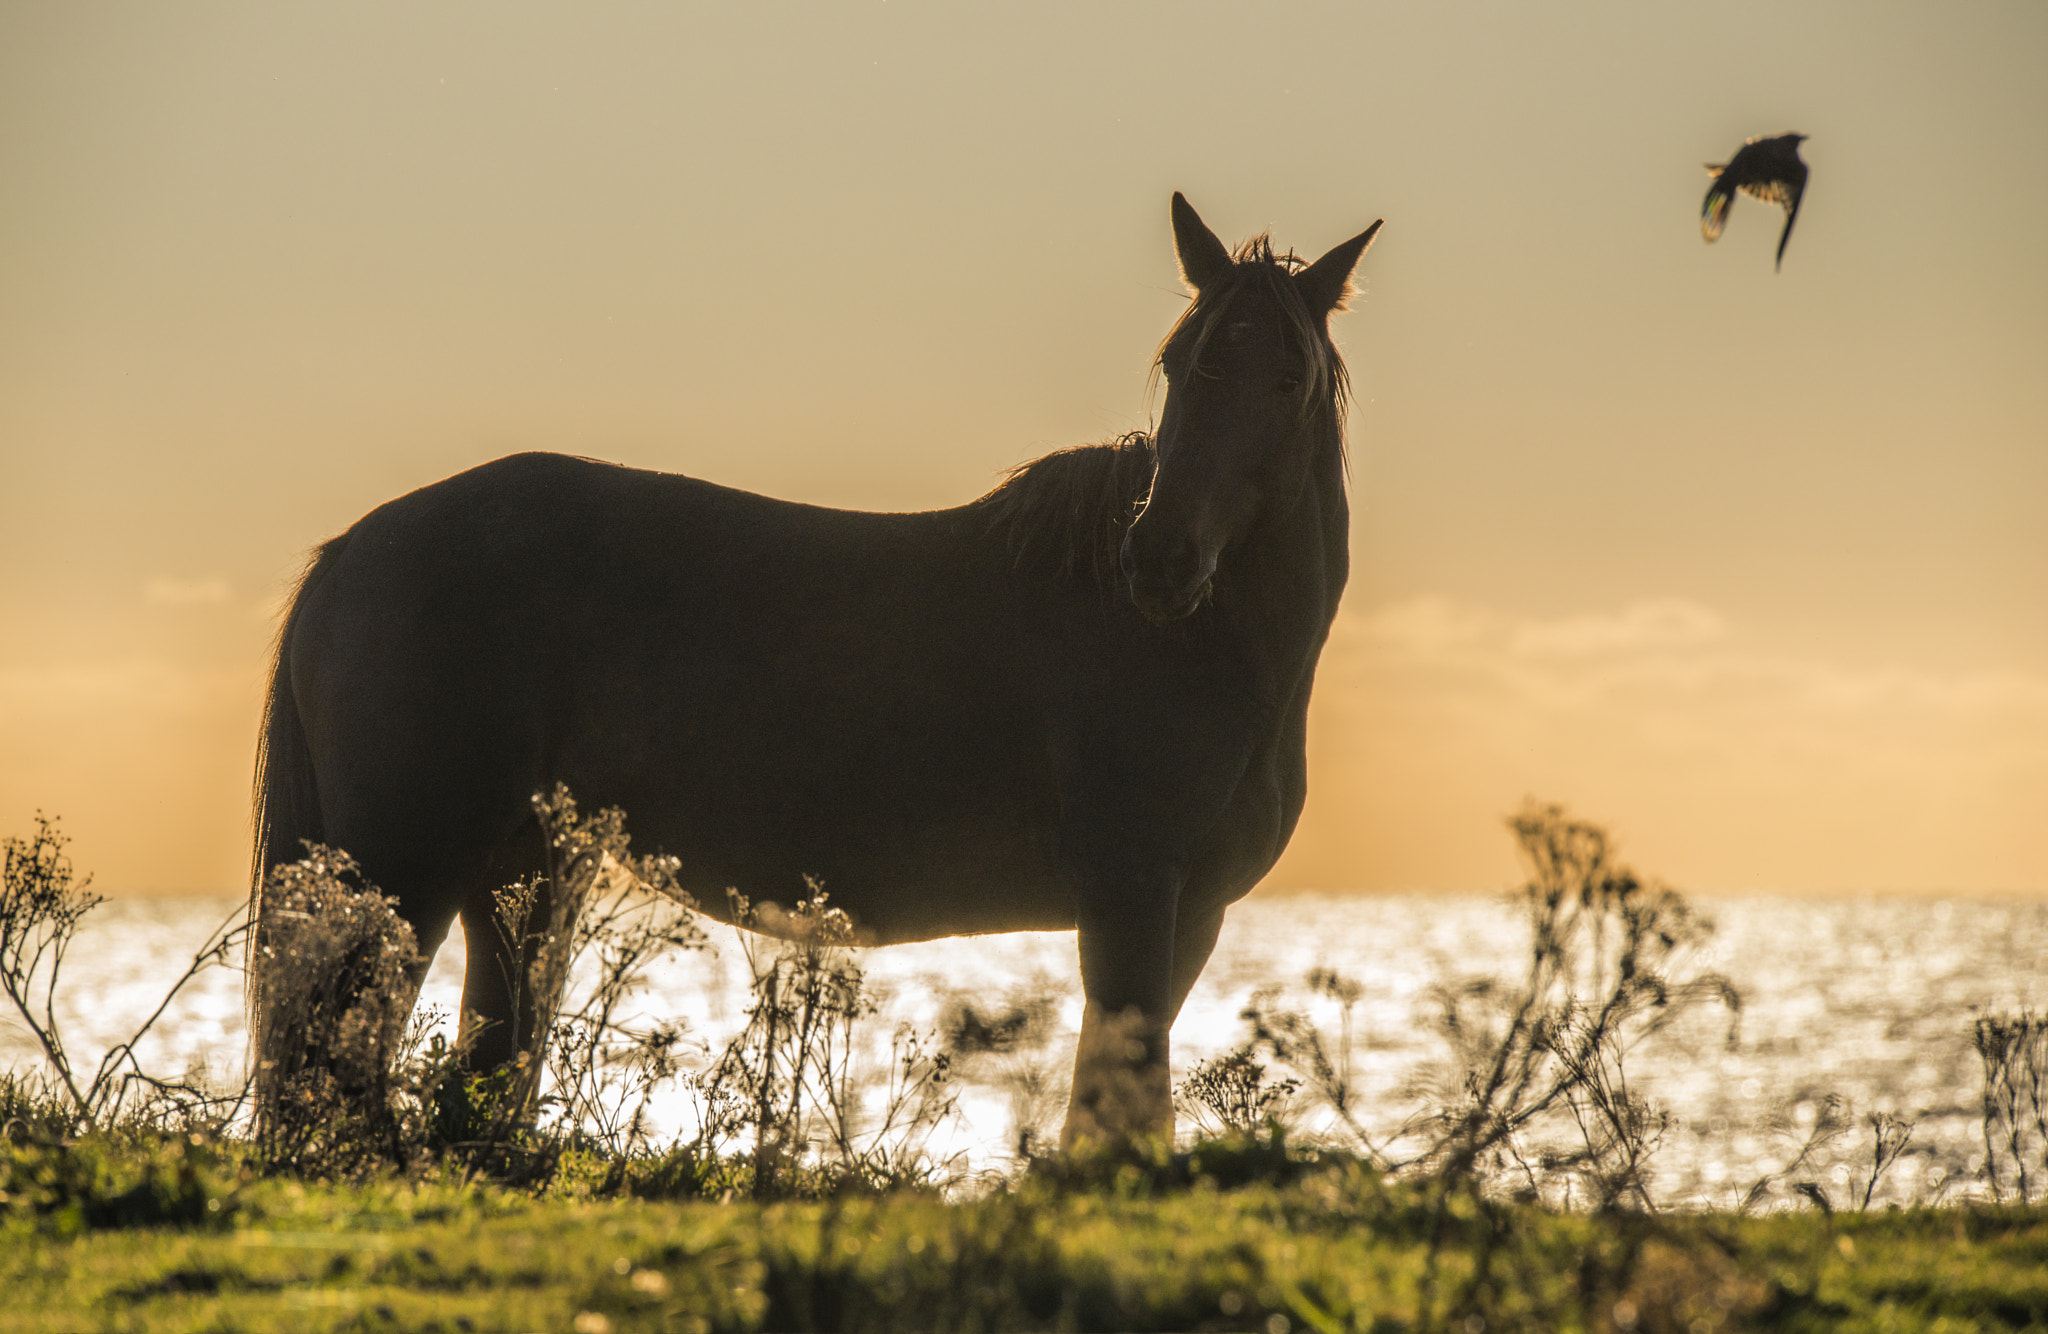 Nikon D800 + Sigma 150-600mm F5-6.3 DG OS HSM | S sample photo. The horse and the bird photography